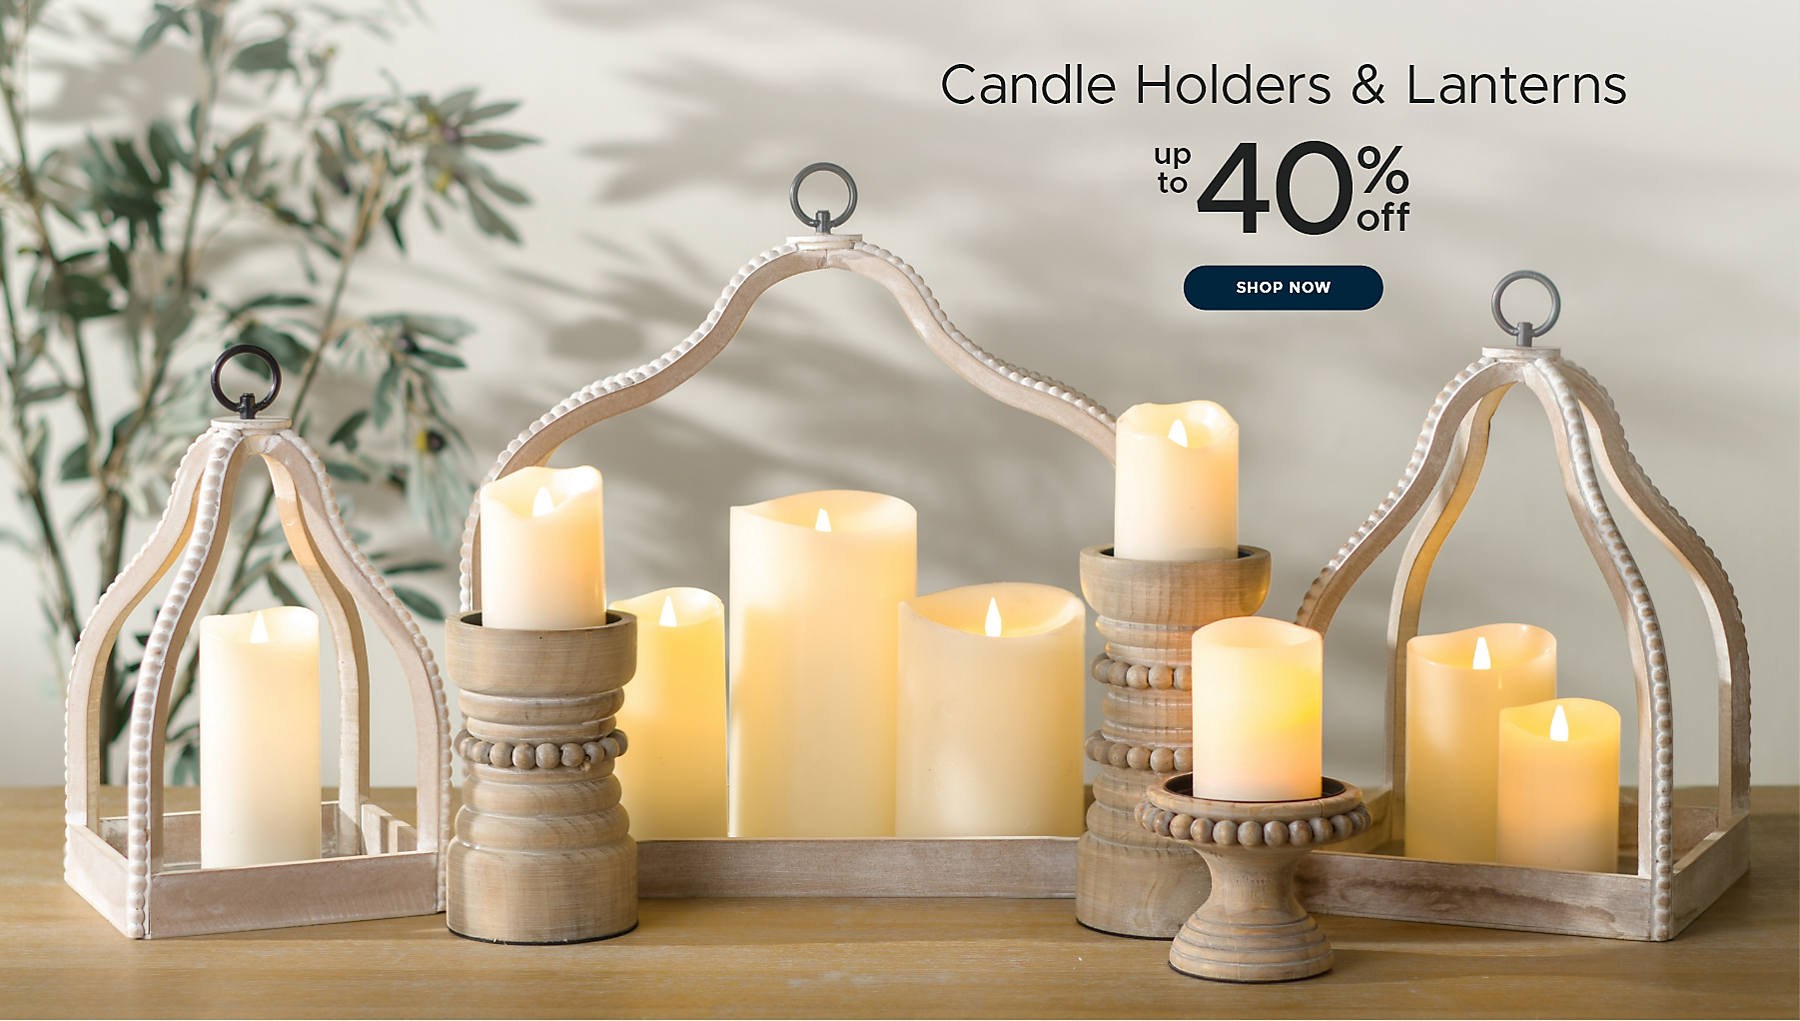 Candle Holders & Lanterns up to 40% off shop now